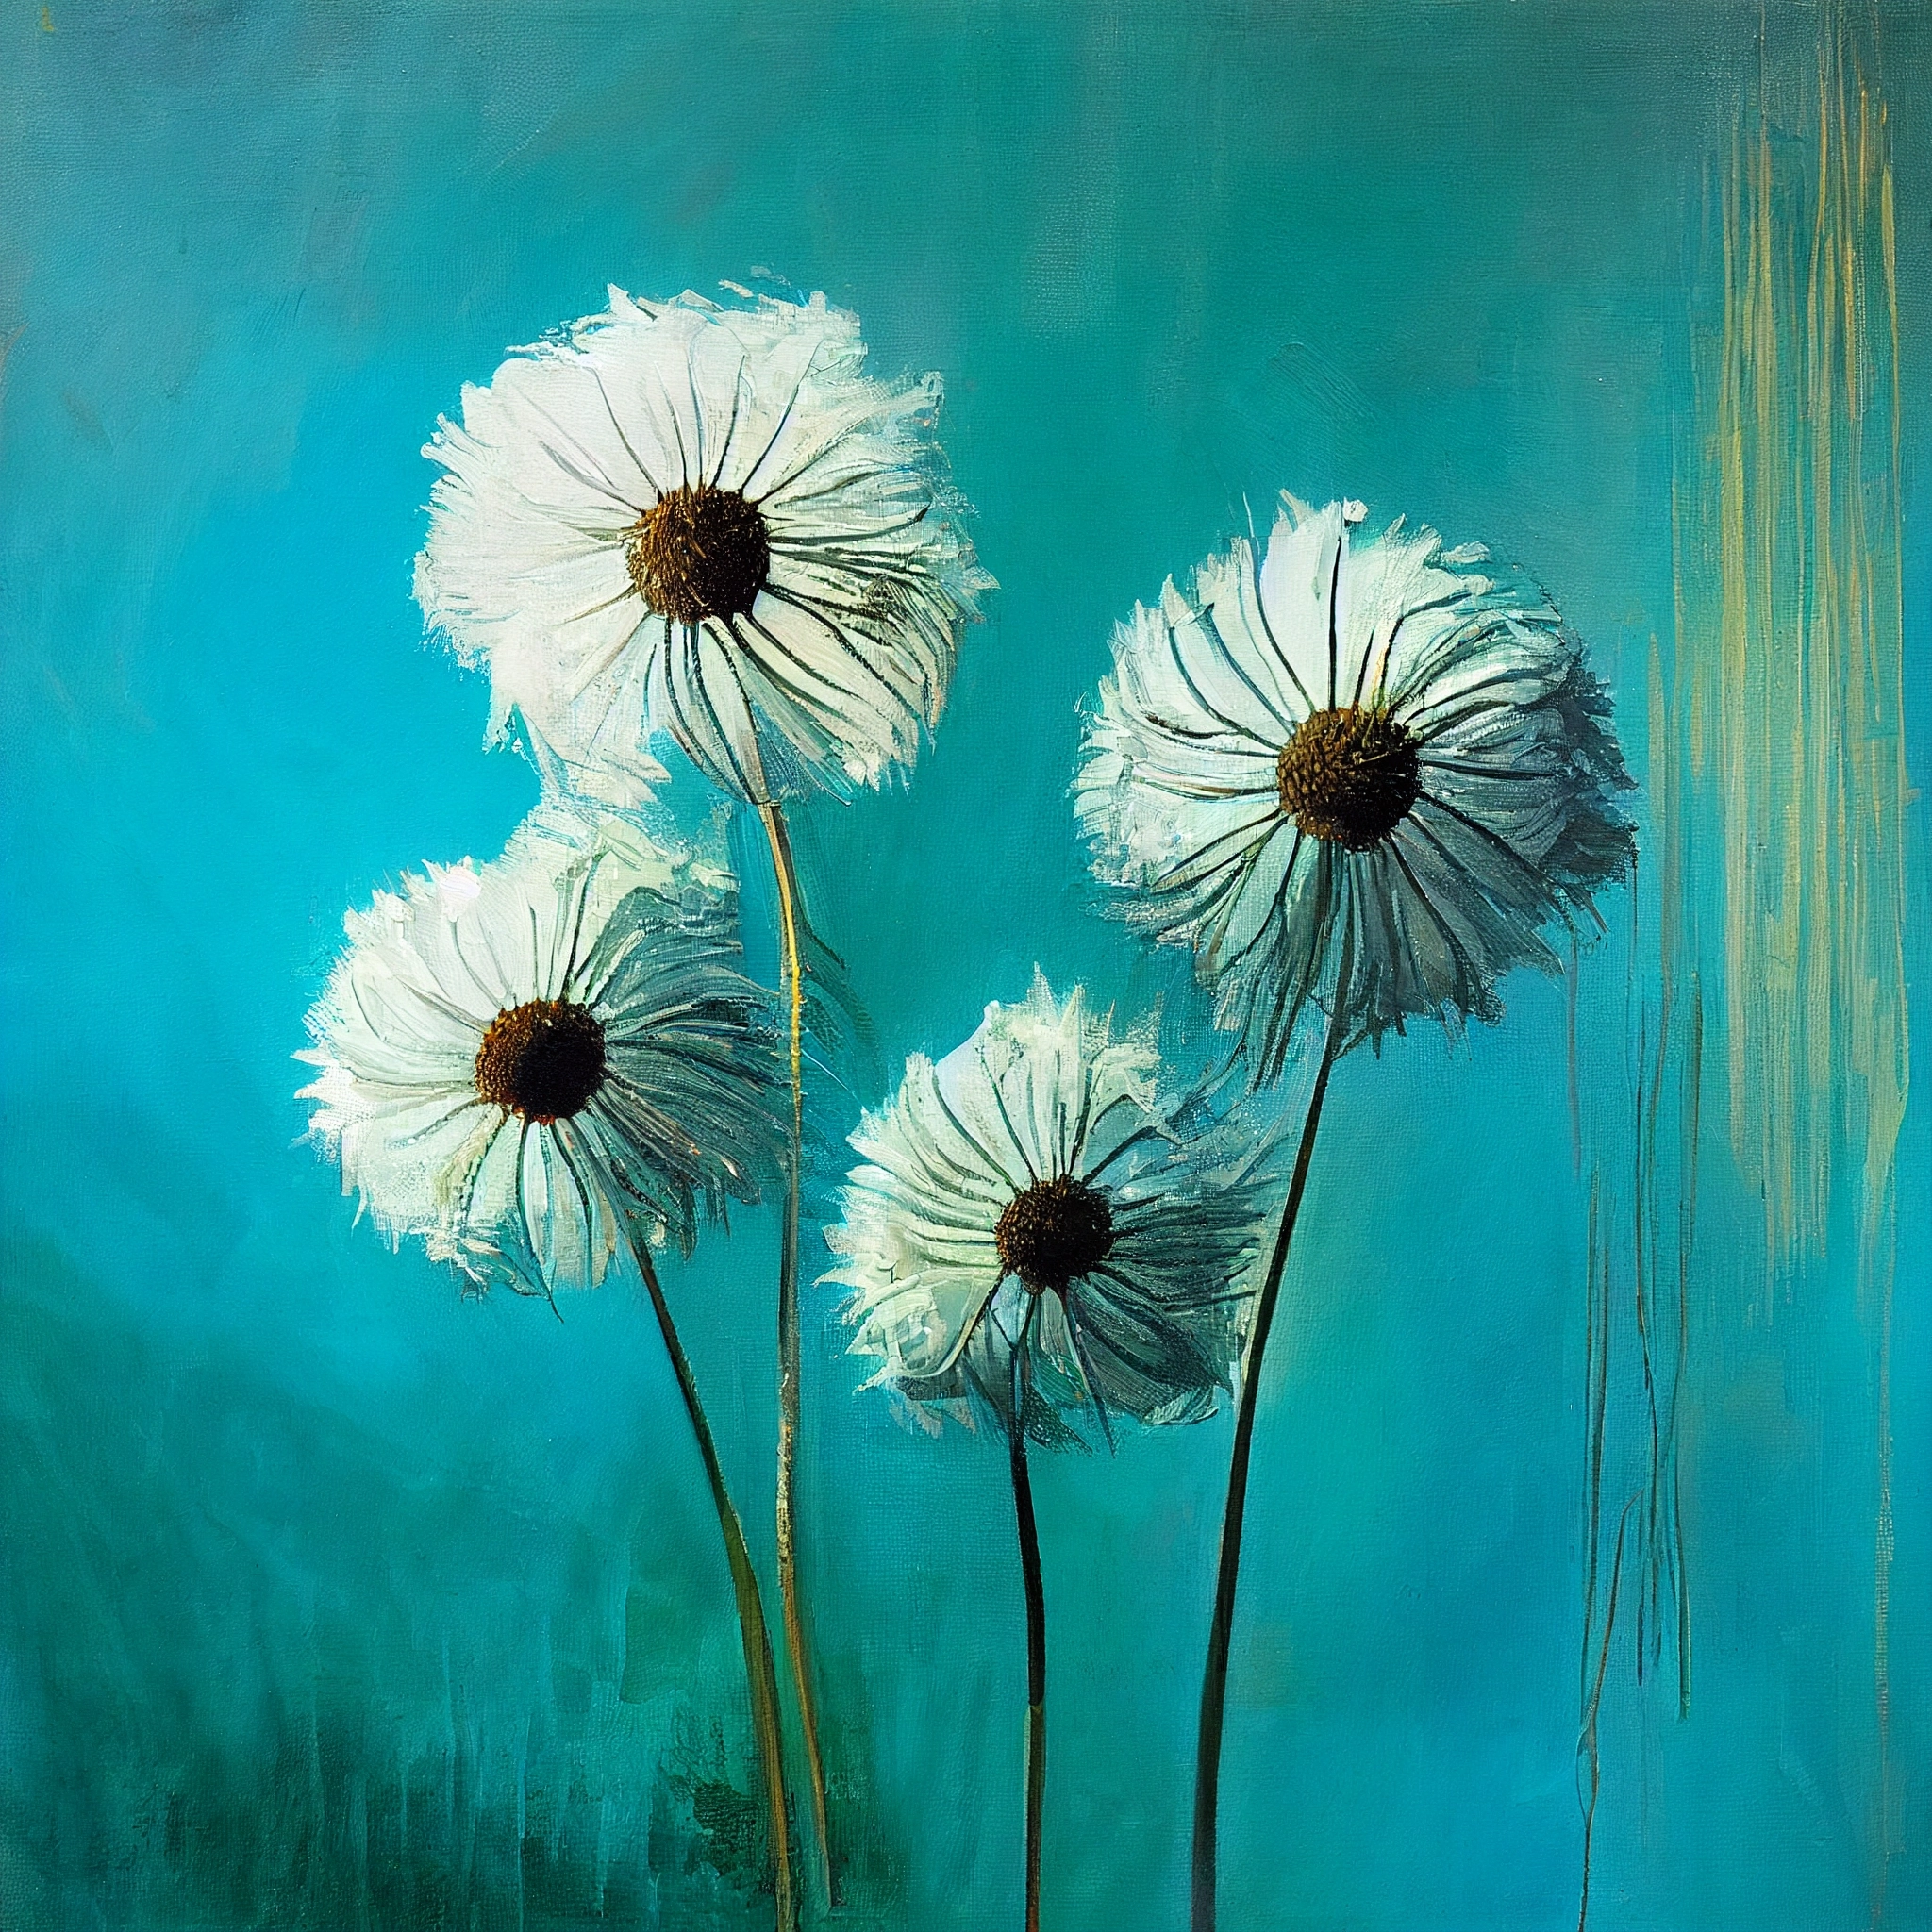 "Dandelion Dreams: Adorn Your Walls with the Serenity and Beauty of this Stunning Oil Painting Print on Vibrant Blue Background"